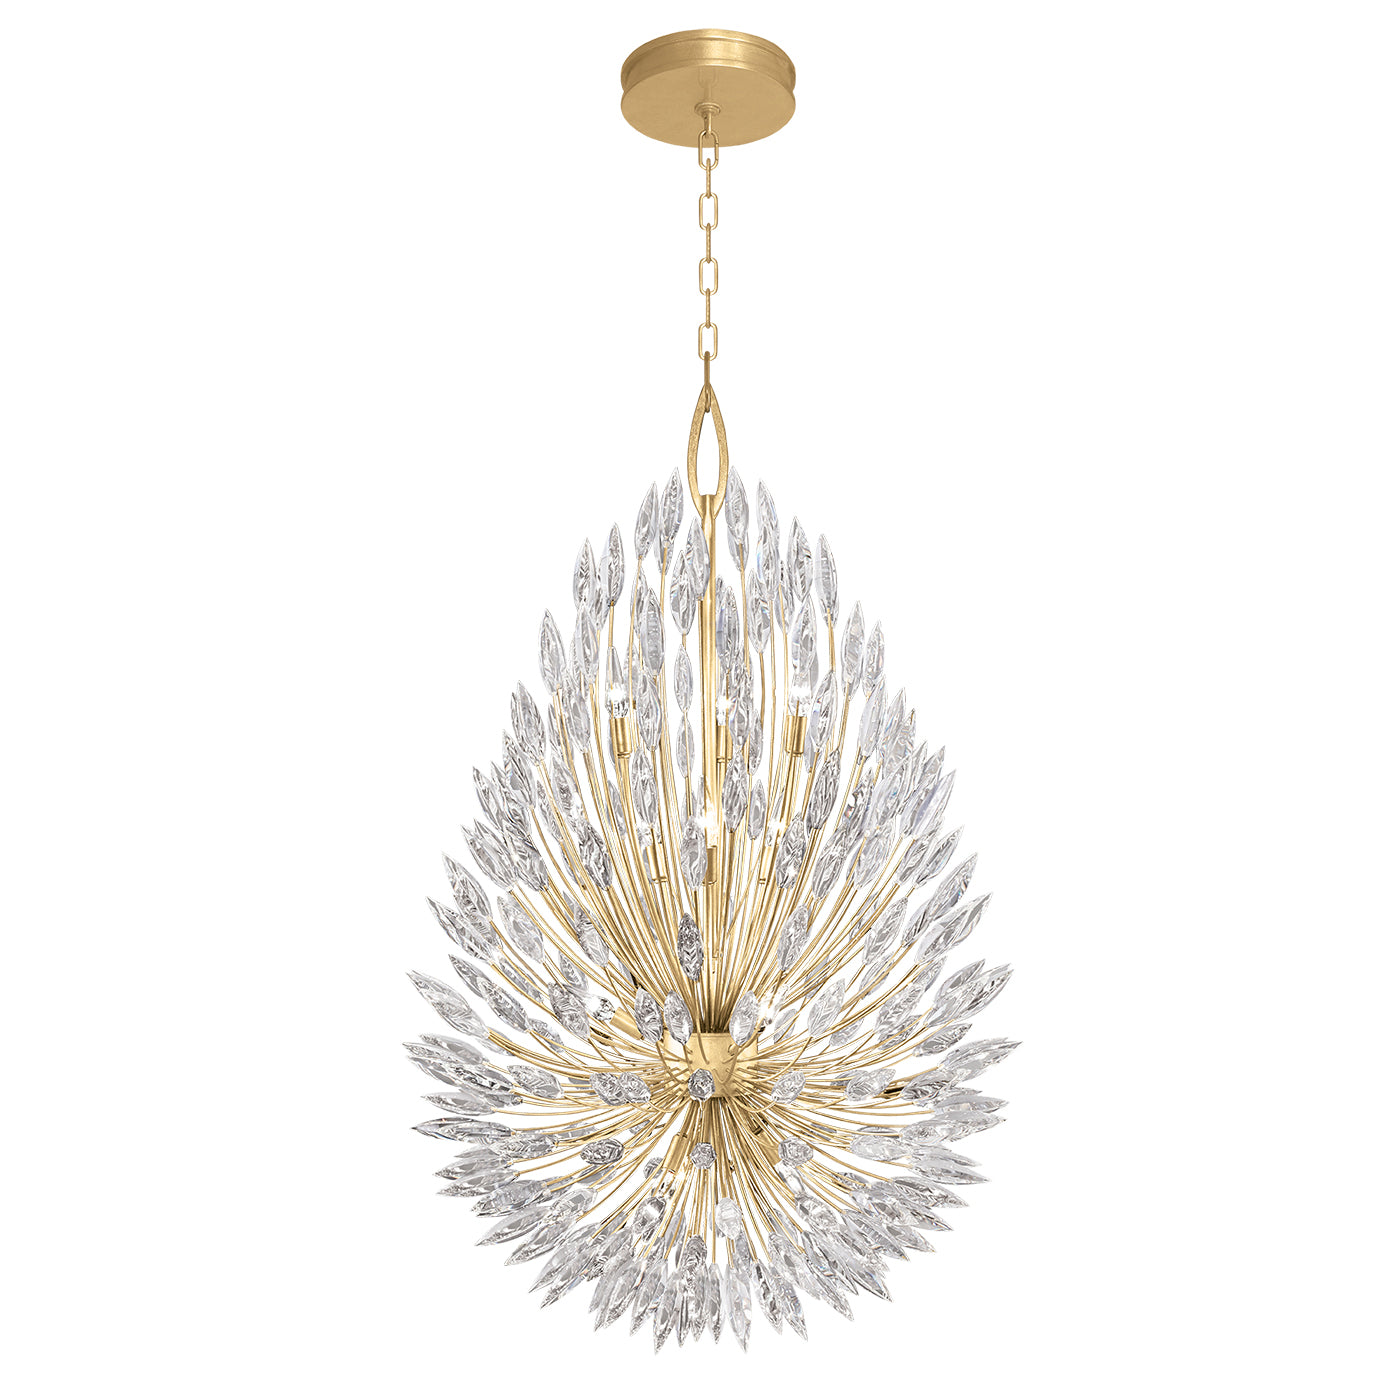 Fine Art Handcrafted Lighting Lily Buds Pendant Chandeliers Fine Art Handcrafted Lighting Gold 33.5 x 52 